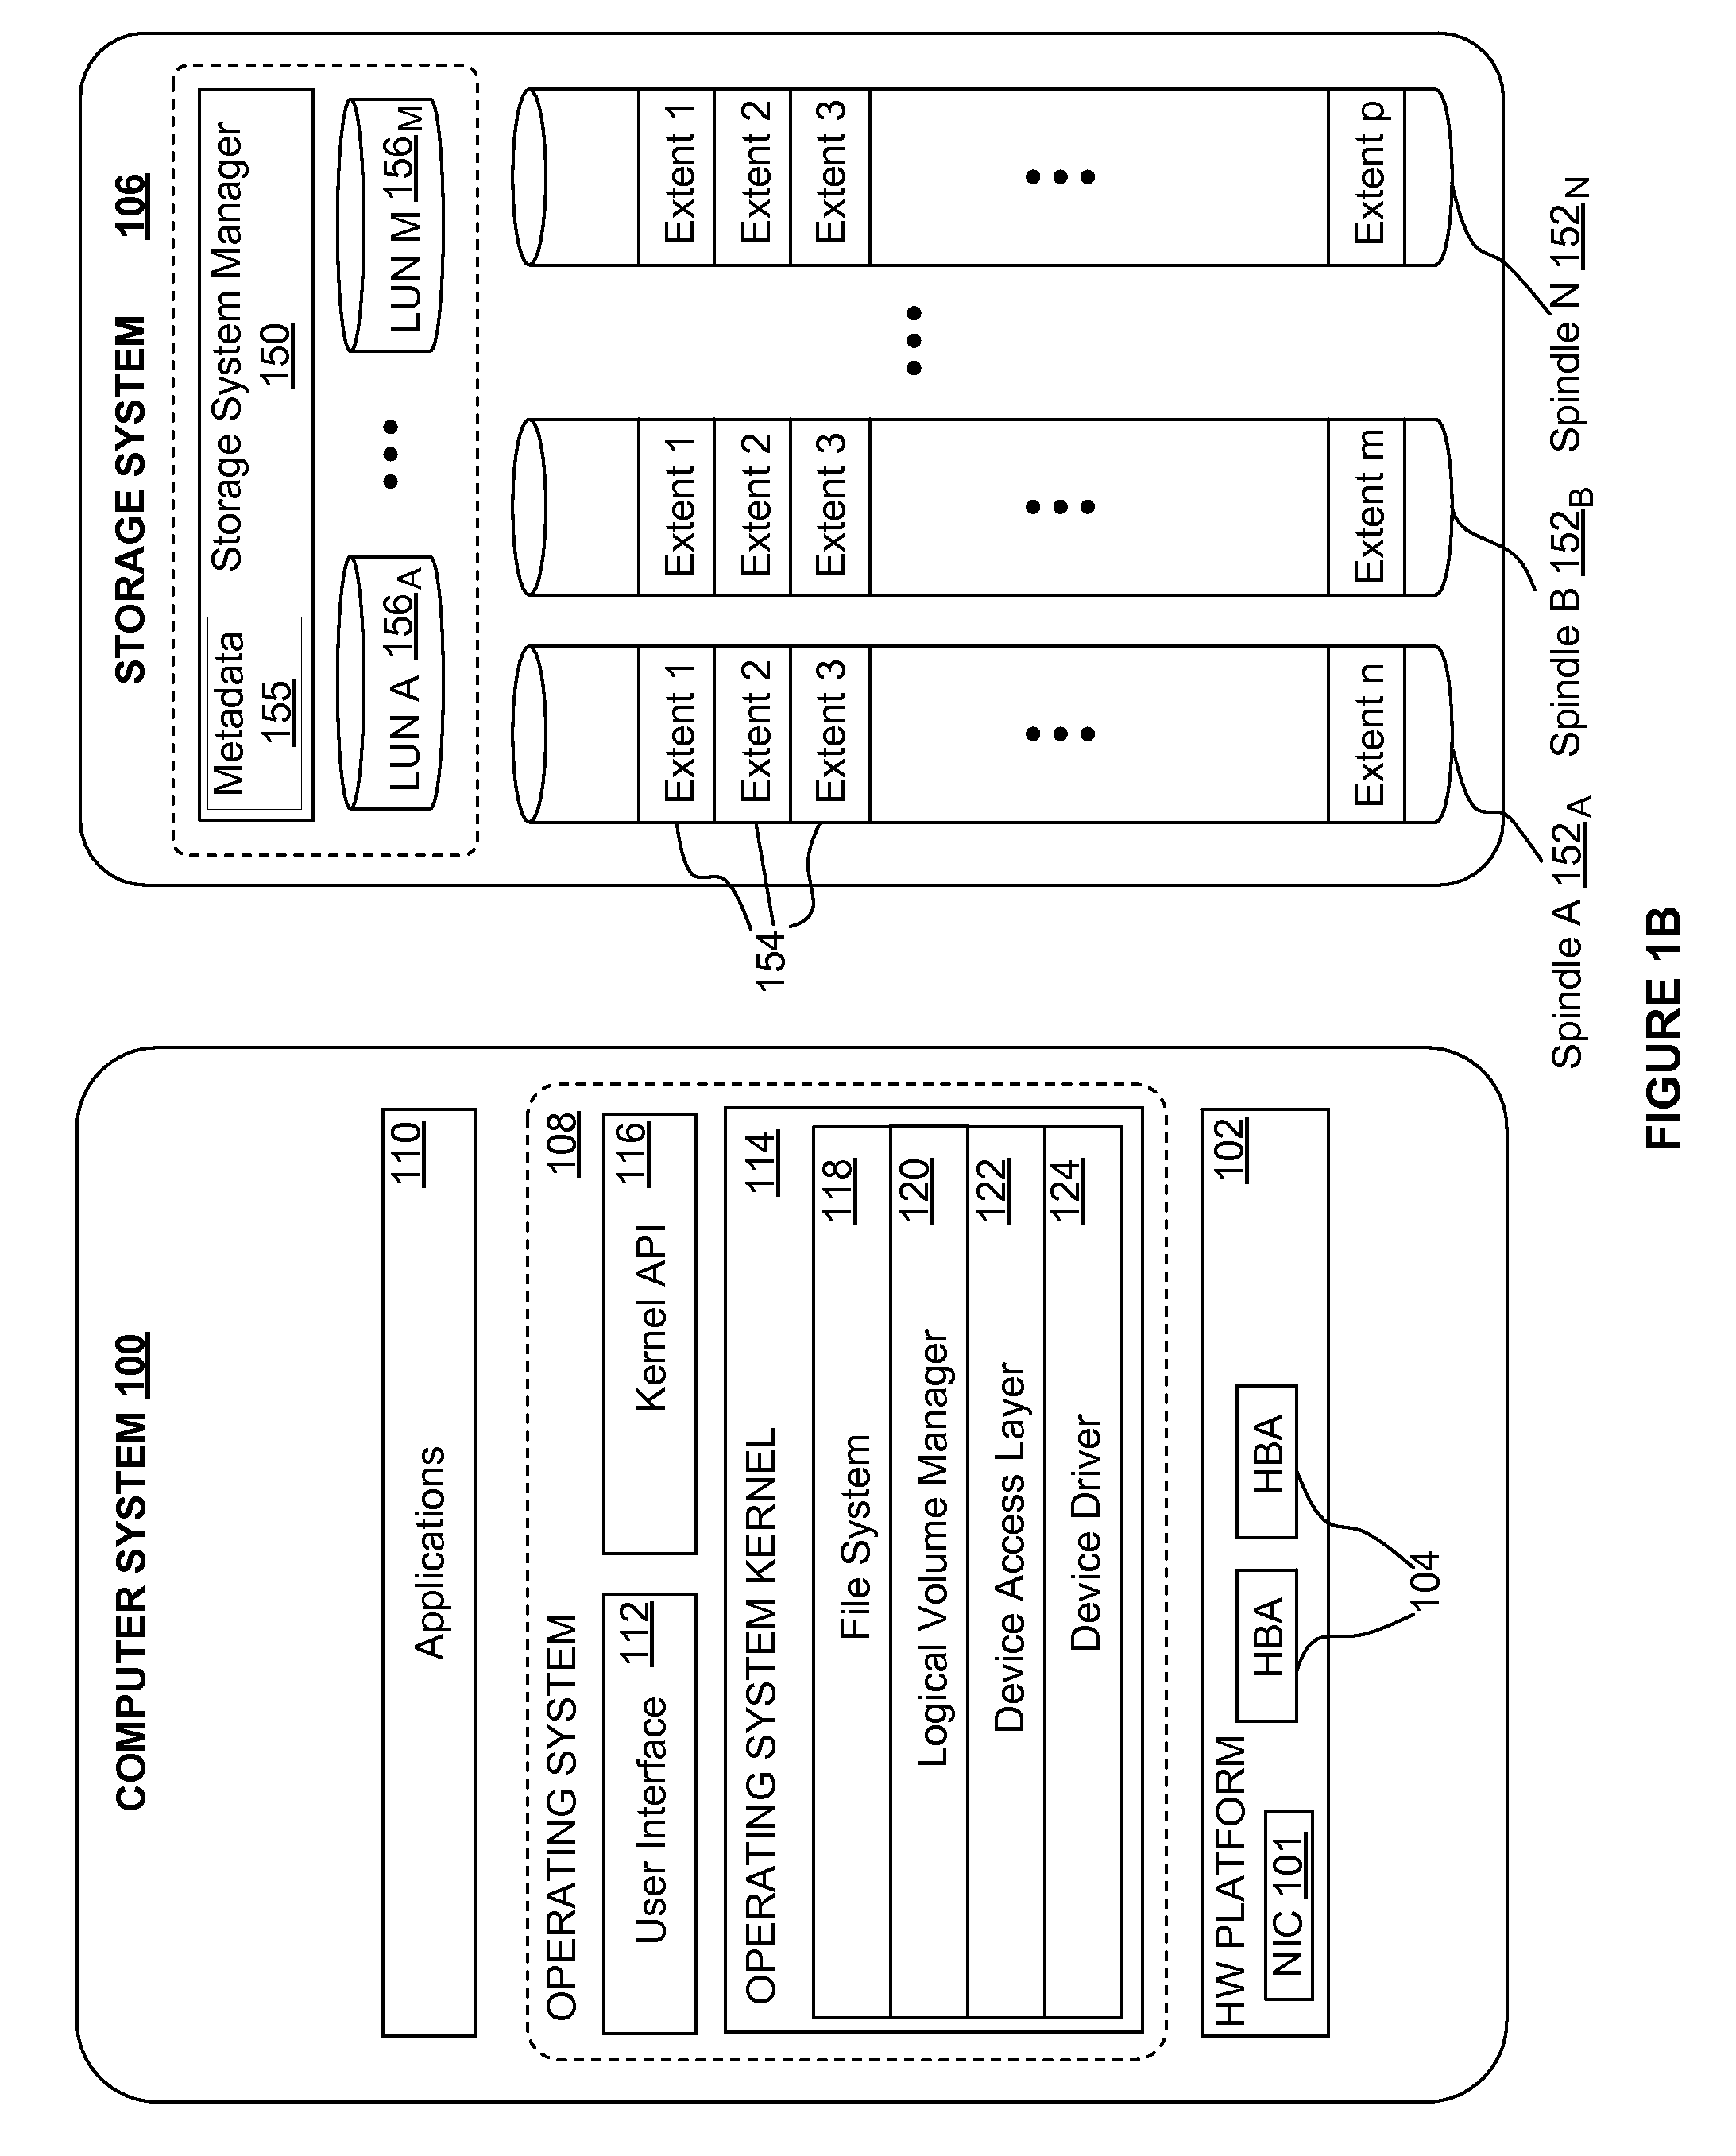 Offloading storage operations to storage hardware using a third party server